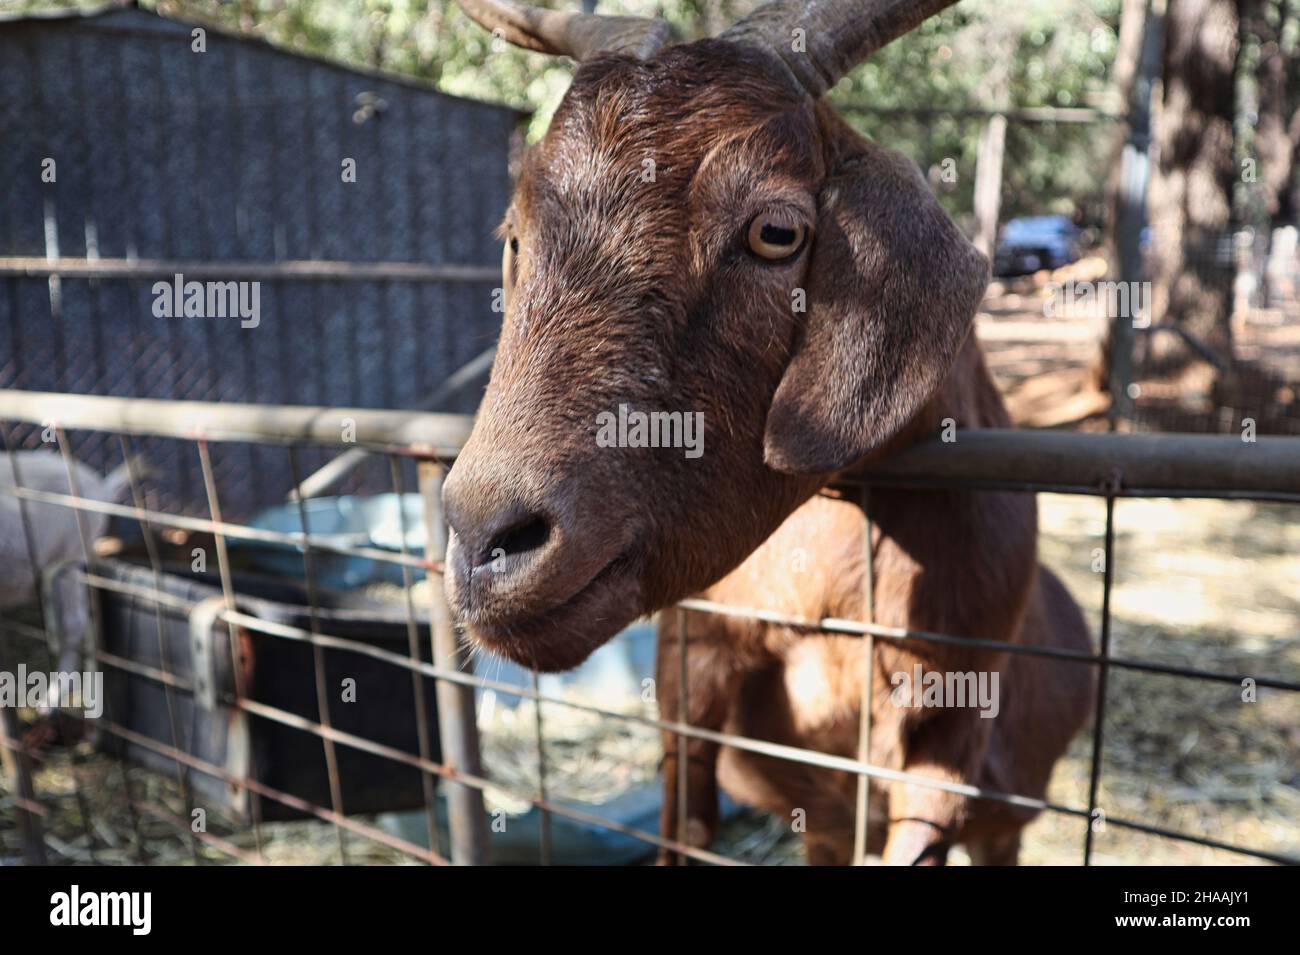 A brown goat with horns looking over a metal gate or fence Stock Photo